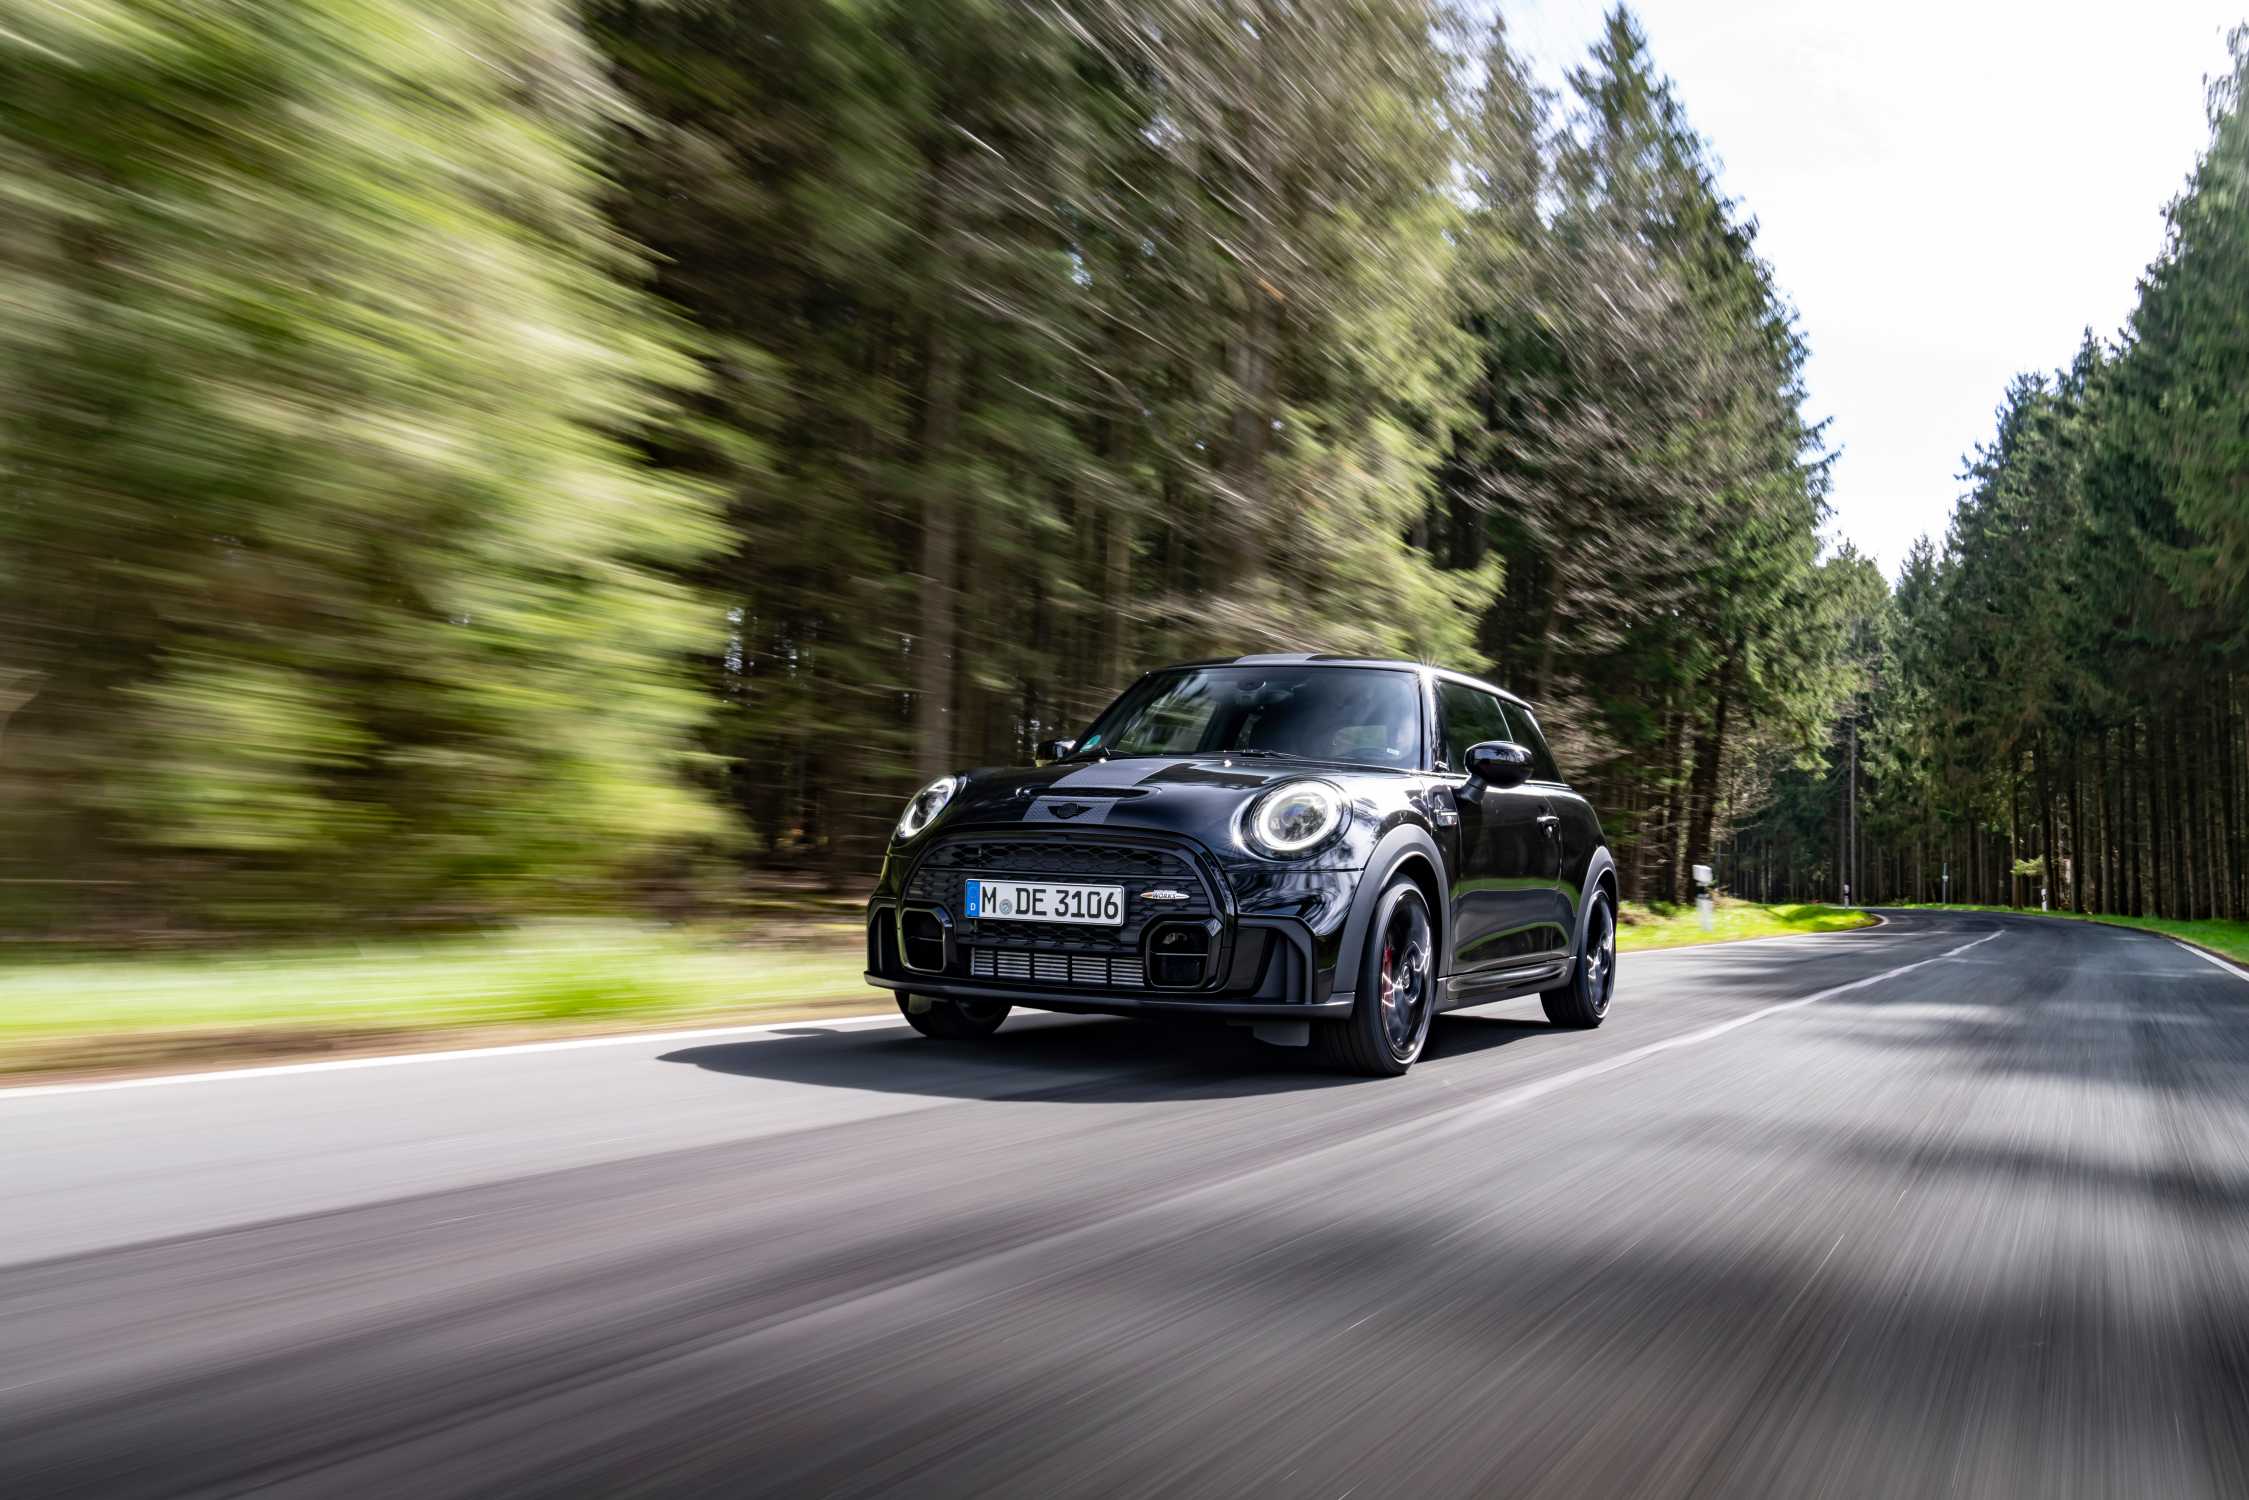 SPECIAL MINI JOHN COOPER WORKS 1TO6 EDITION HIGHLIGHTS FUN OF MANUAL